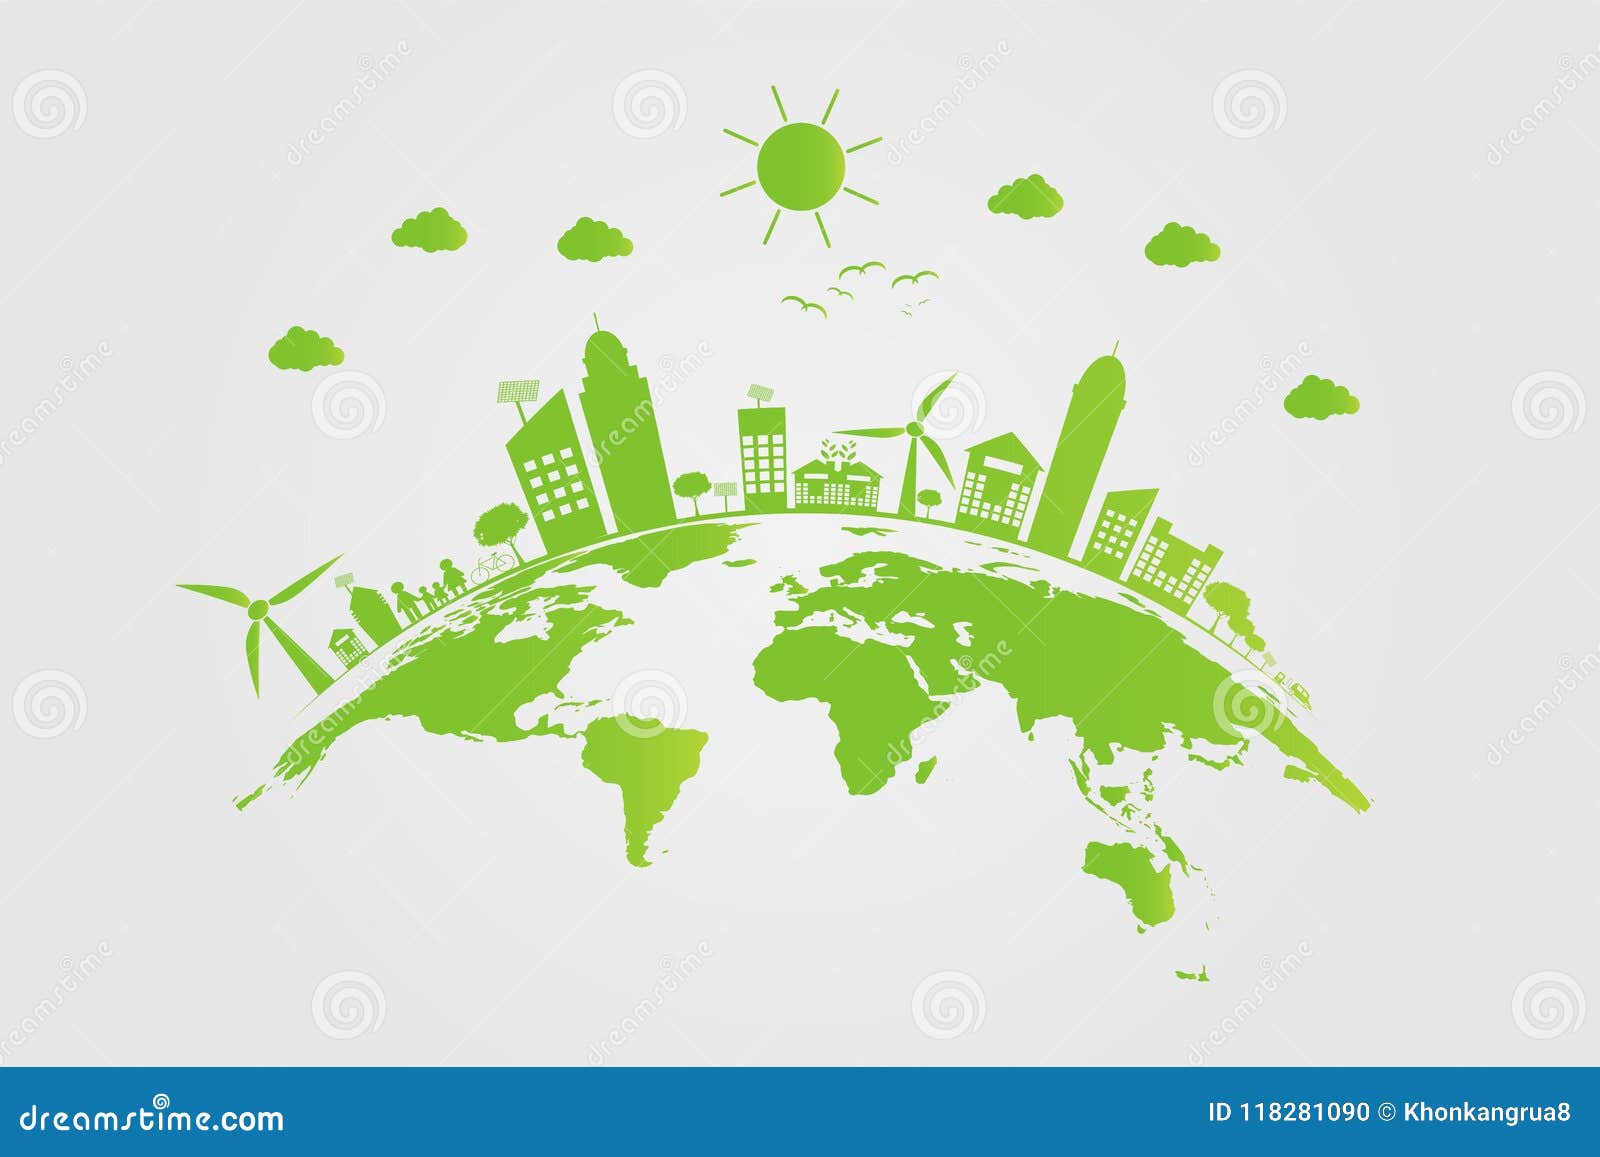 ecology.green cities help the world with eco-friendly concept ideas. 